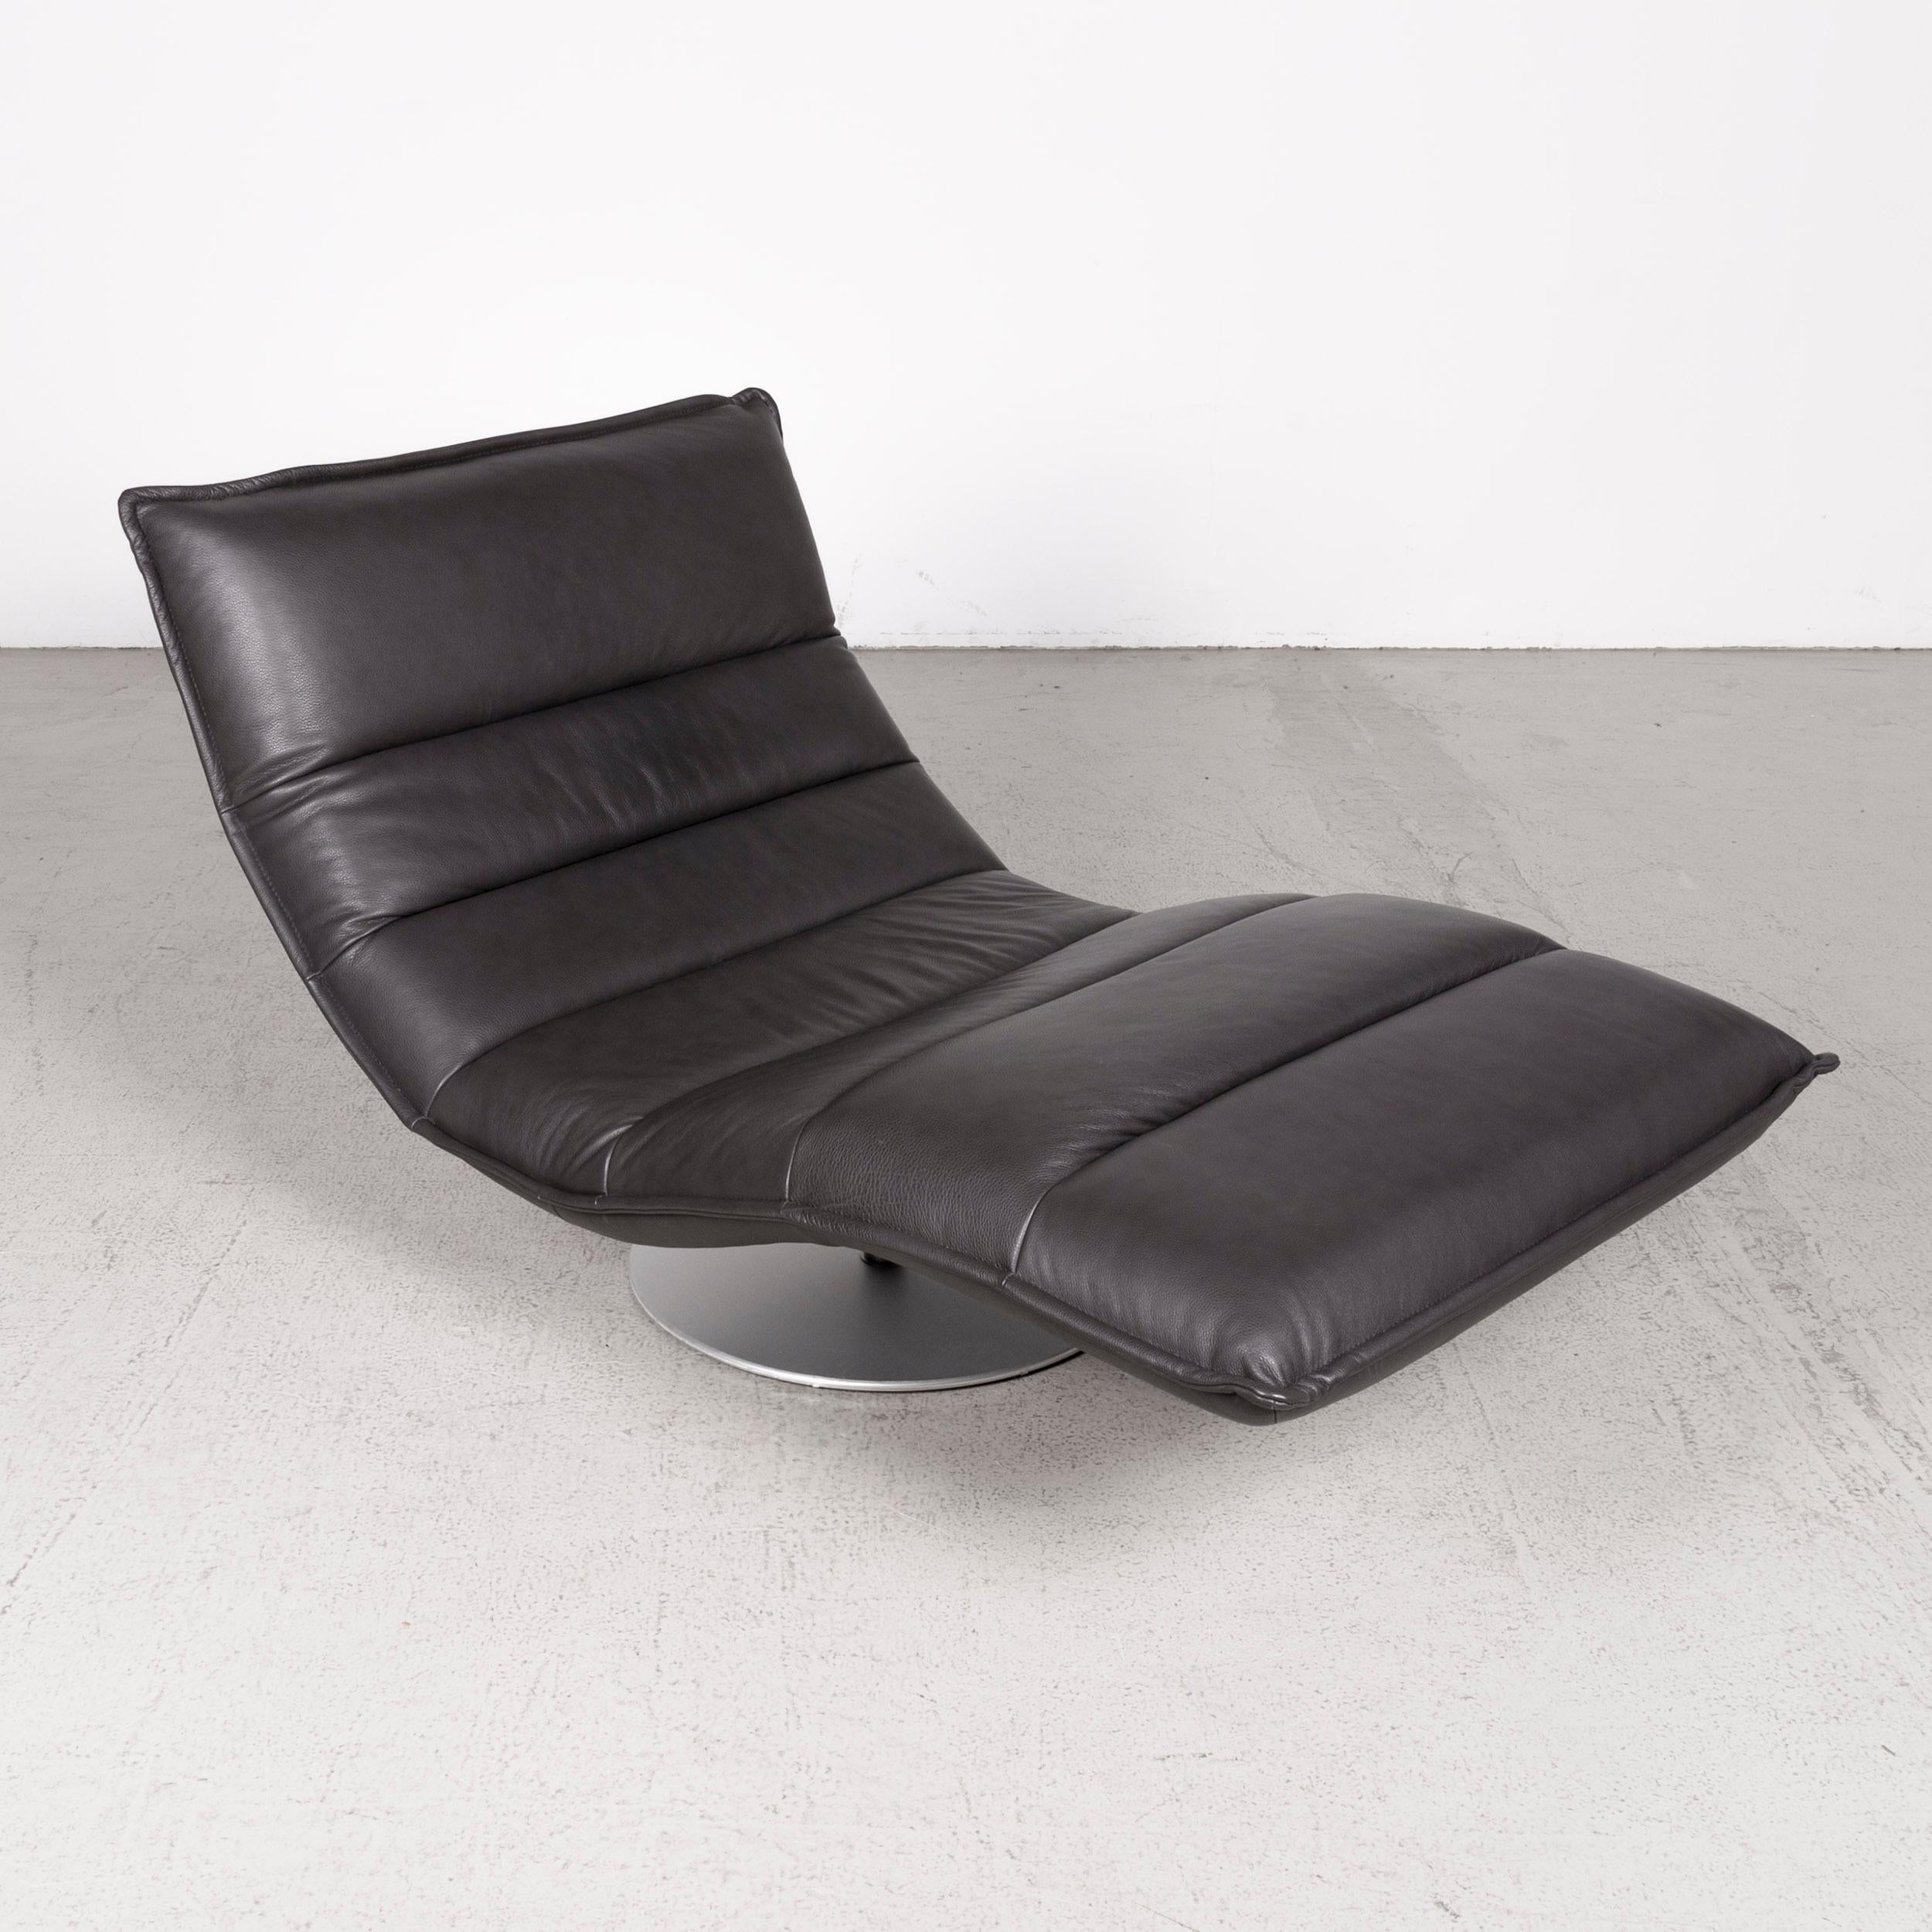 Willi Schillig Inkoognito Leather Lounger Anthracite Genuine Leather For Sale 2